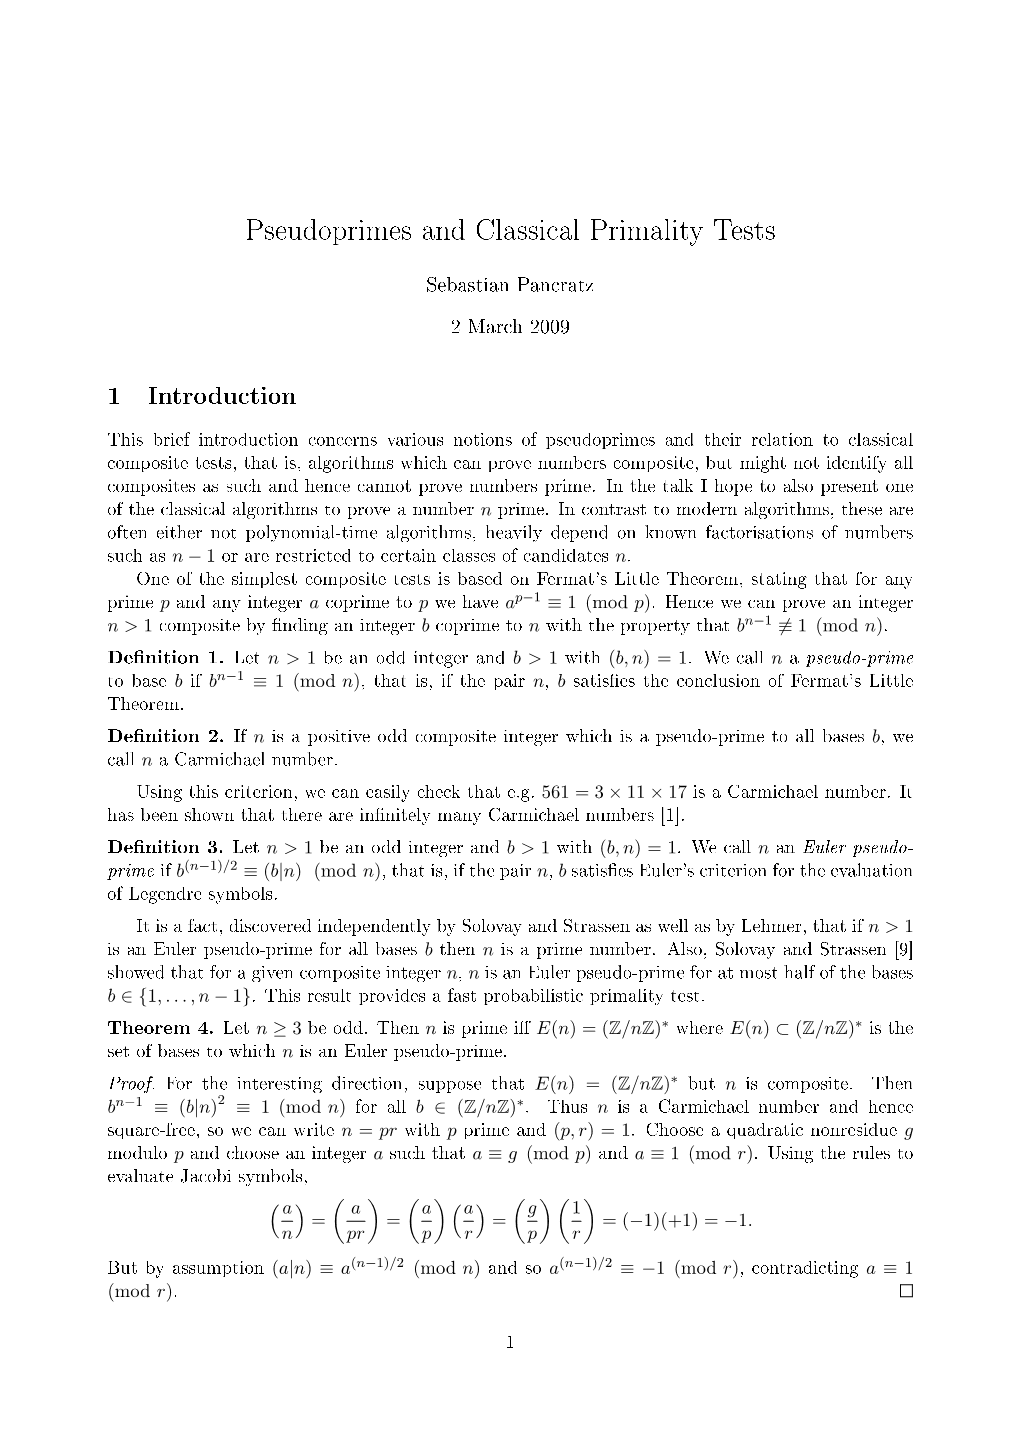 Pseudoprimes and Classical Primality Tests